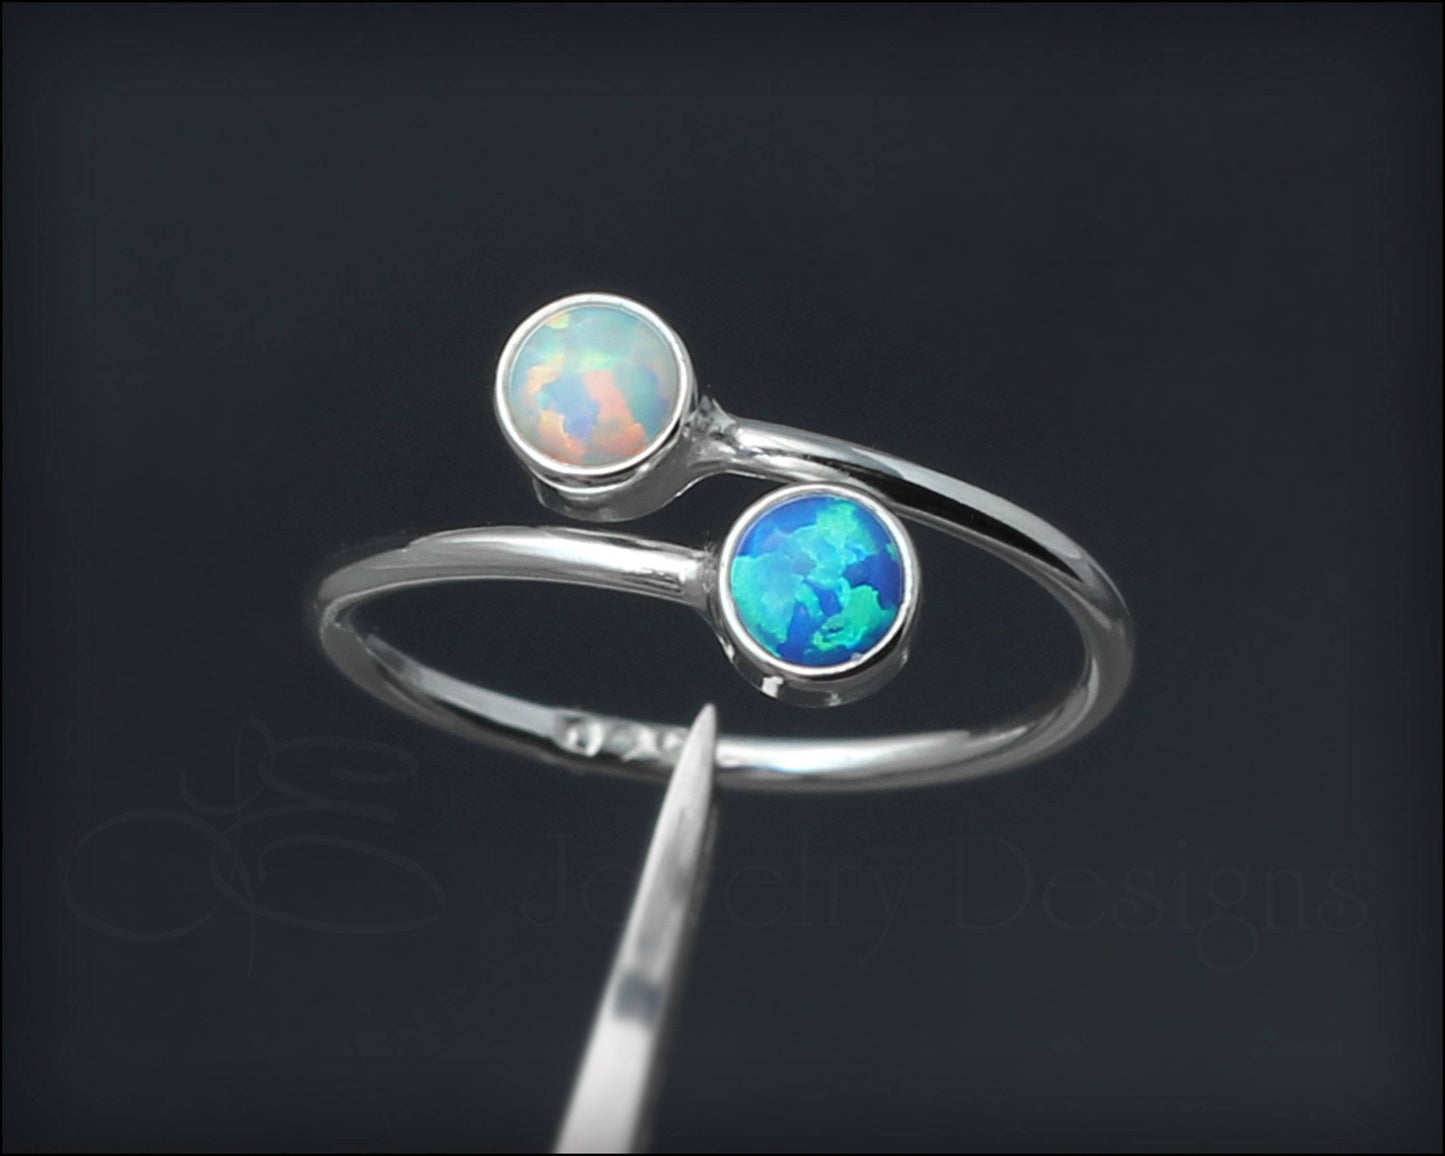 Sterling Dual Birthstone or Opal Ring - LE Jewelry Designs